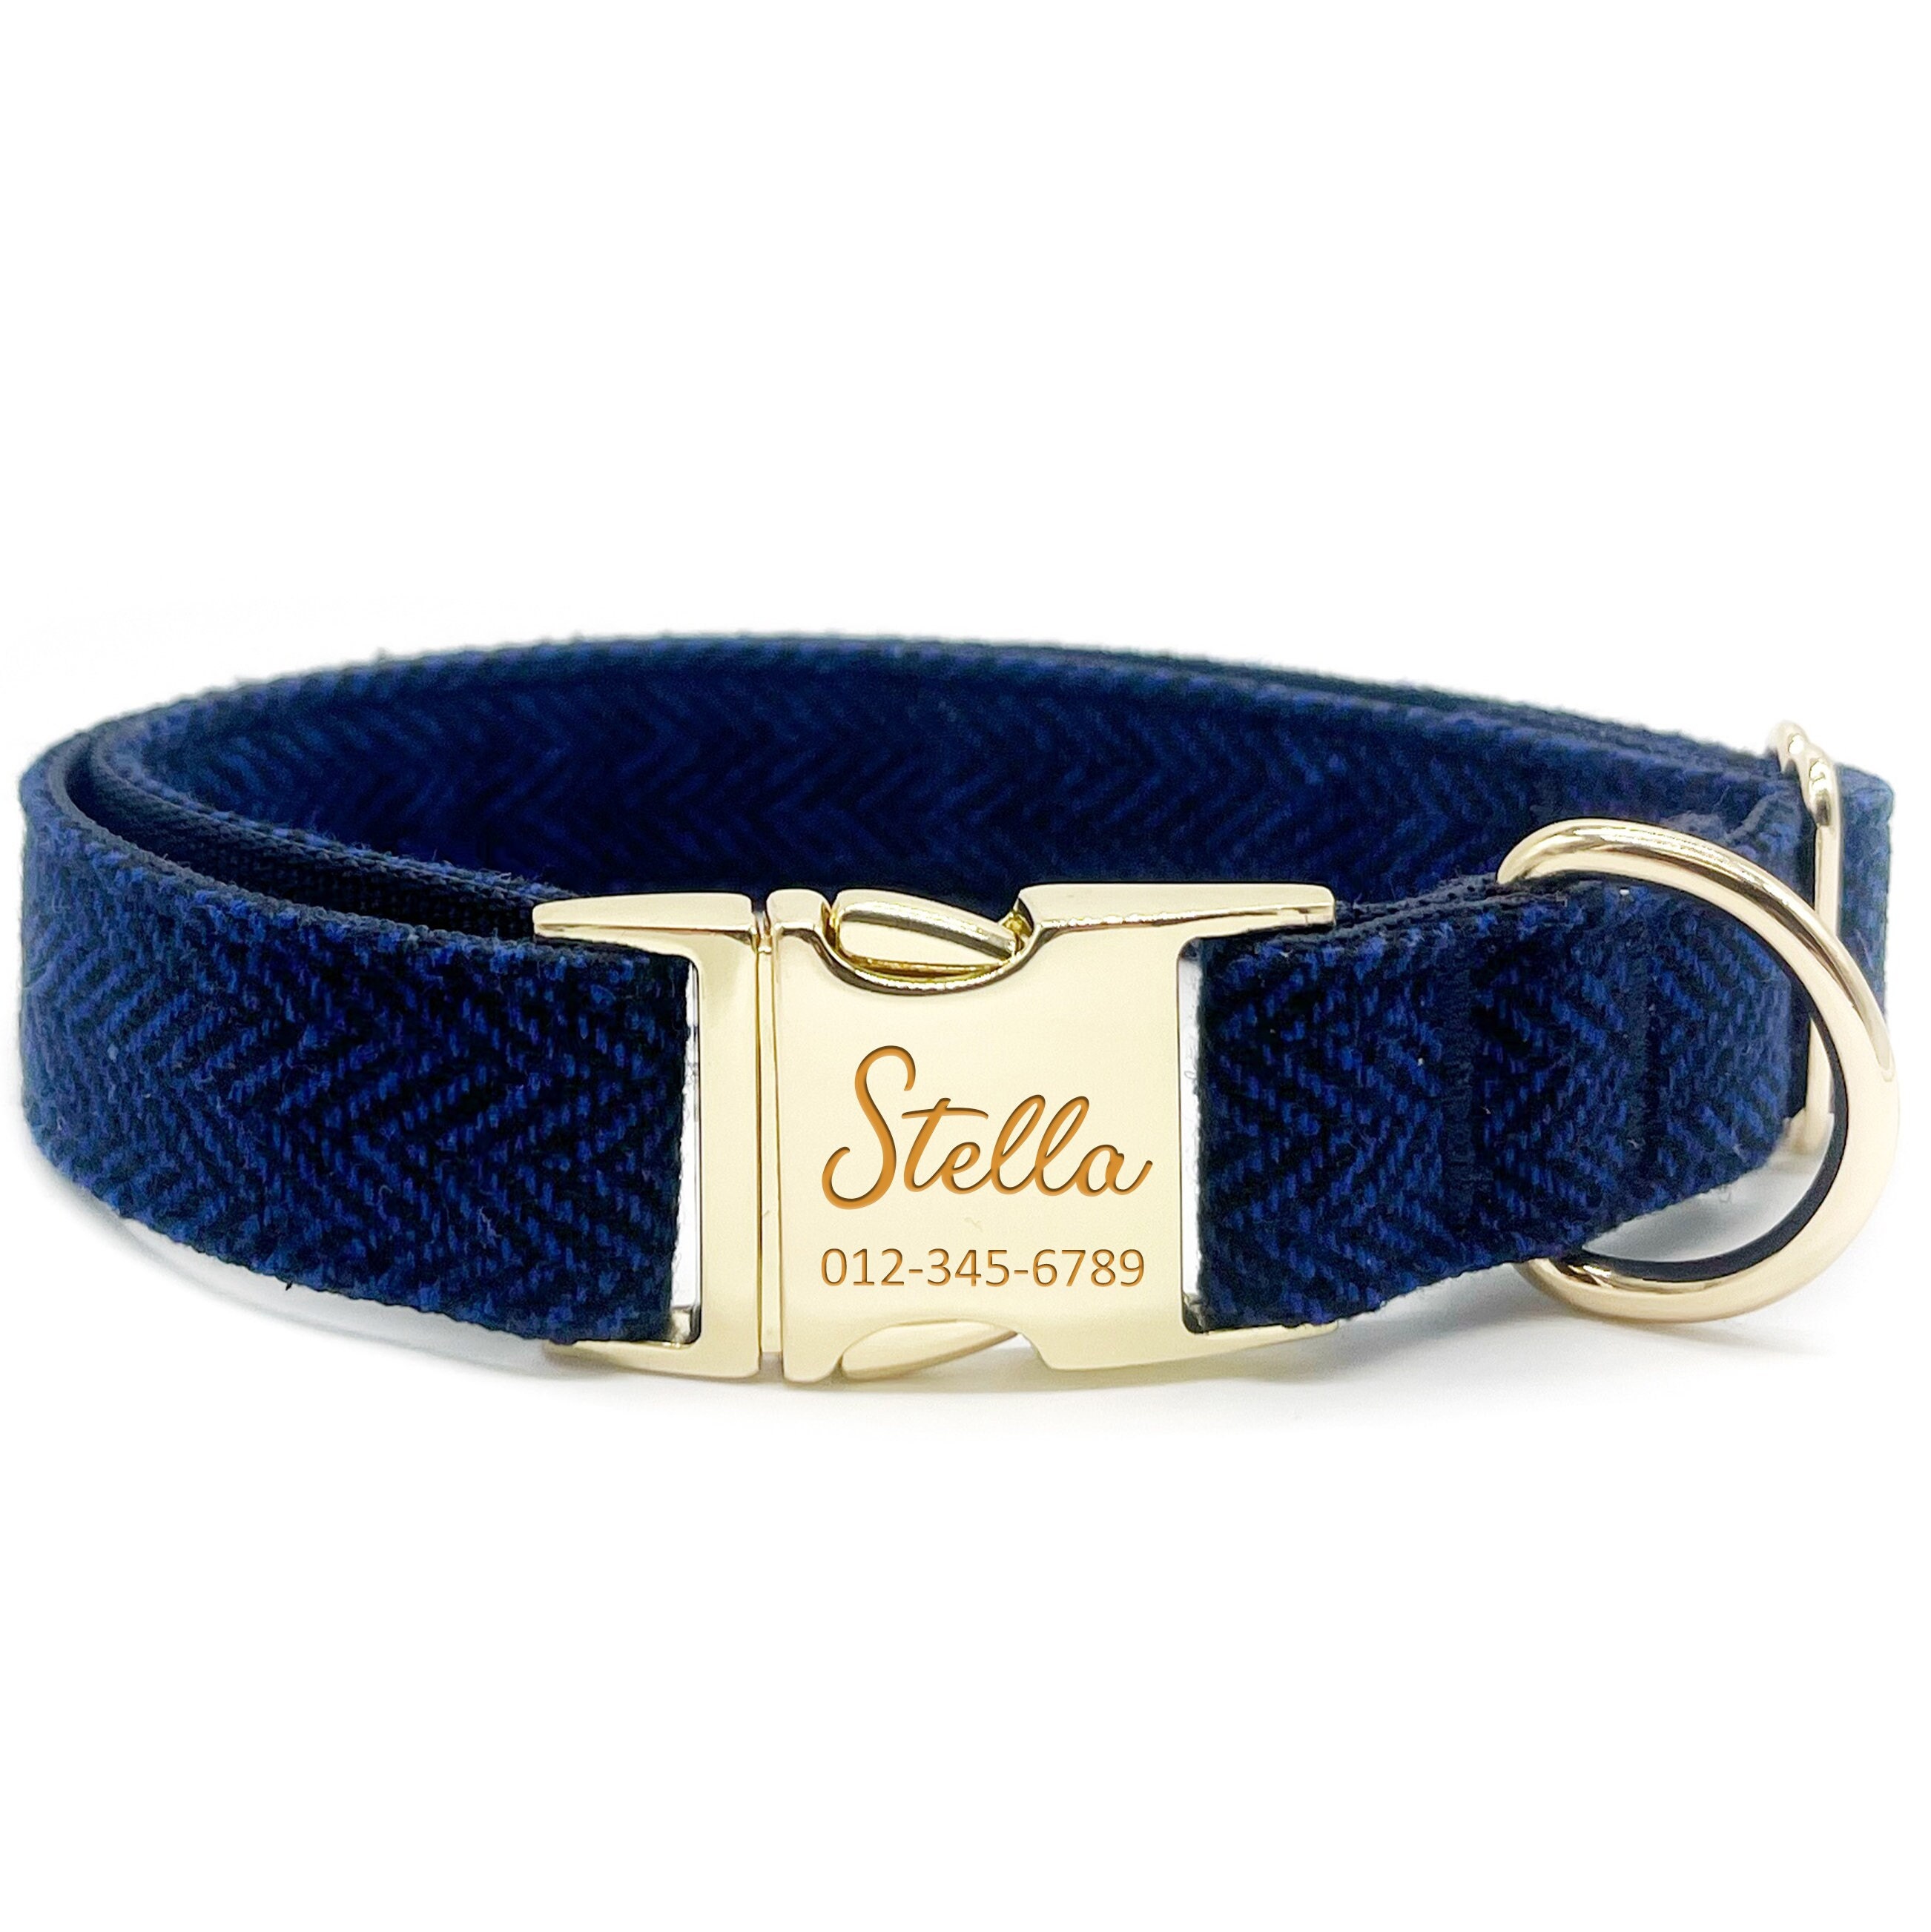 Hermes Etriviere Dog Collar Large Model New – Mightychic